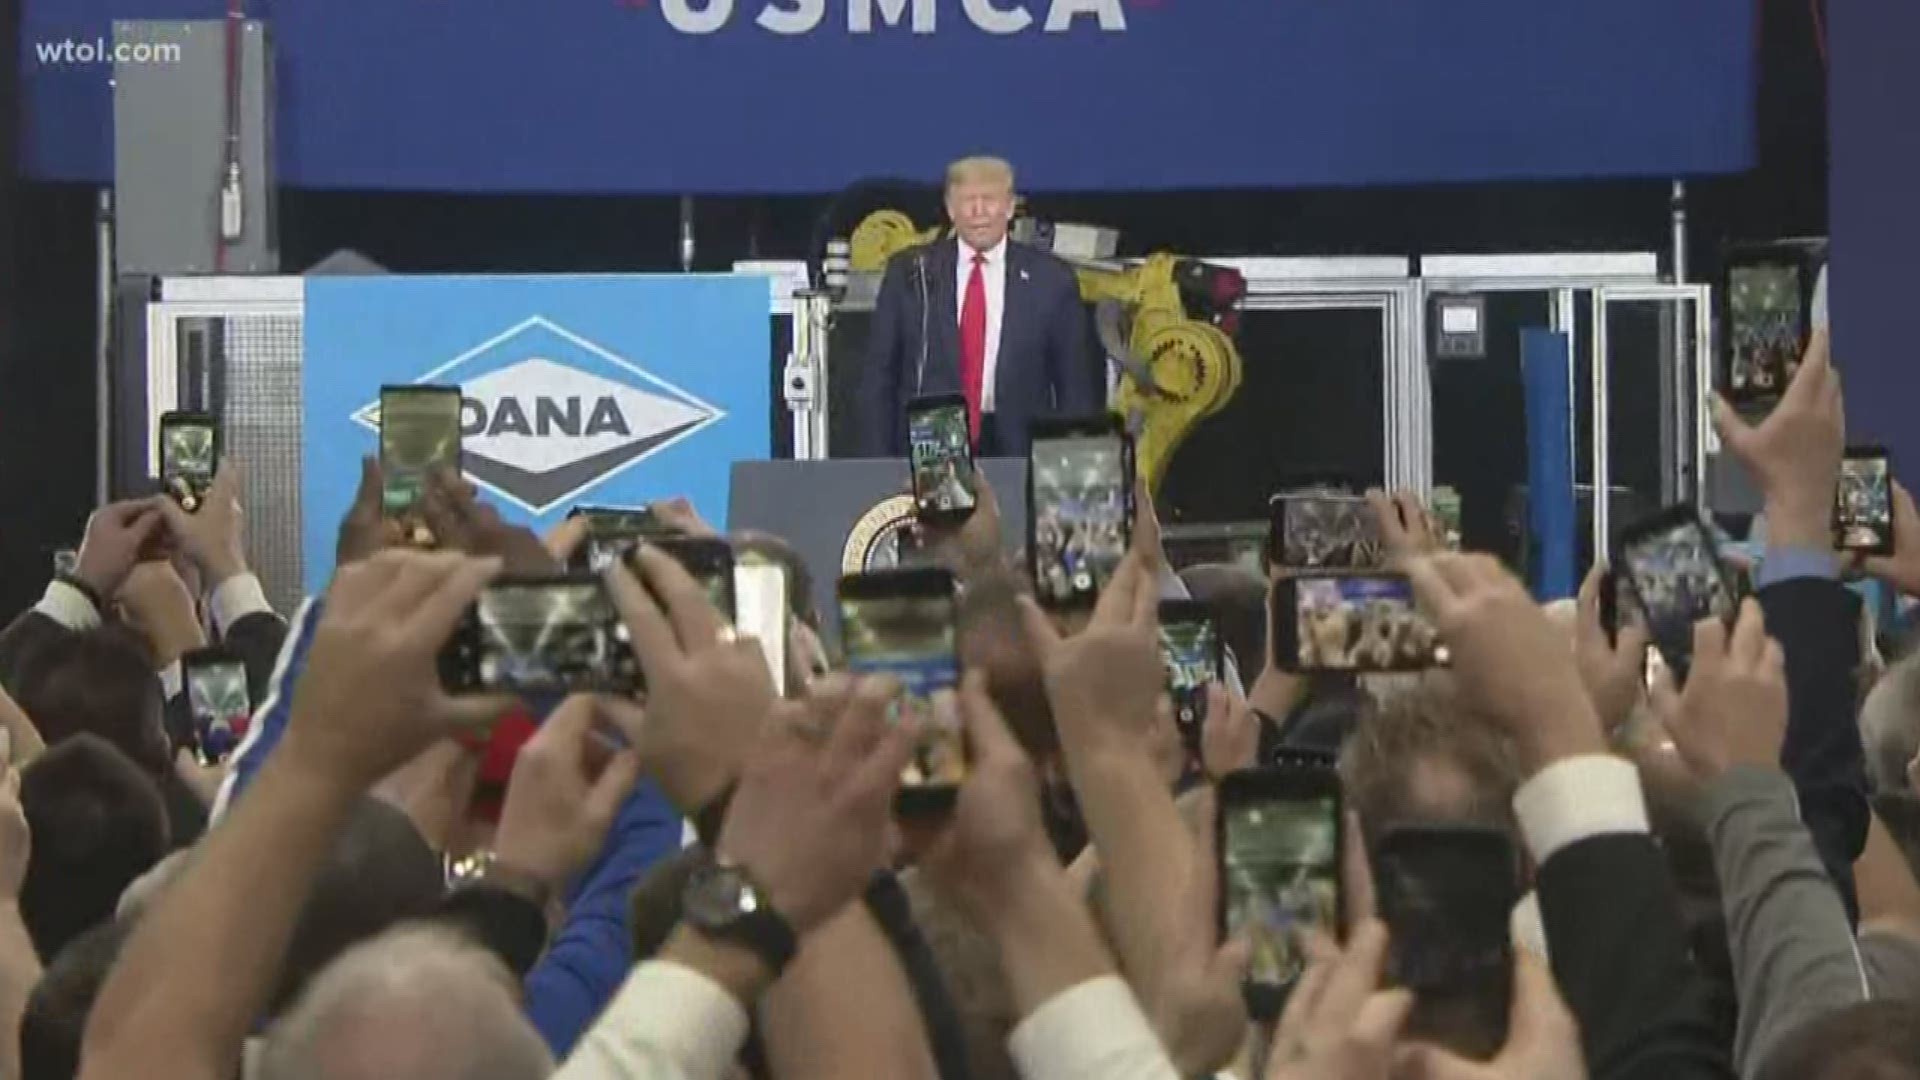 President Donald Trump celebrated signing a new trade agreement with Mexico and Canada by touring Dana, an auto supply manufacturing plant in Warren, Mich., Thursday